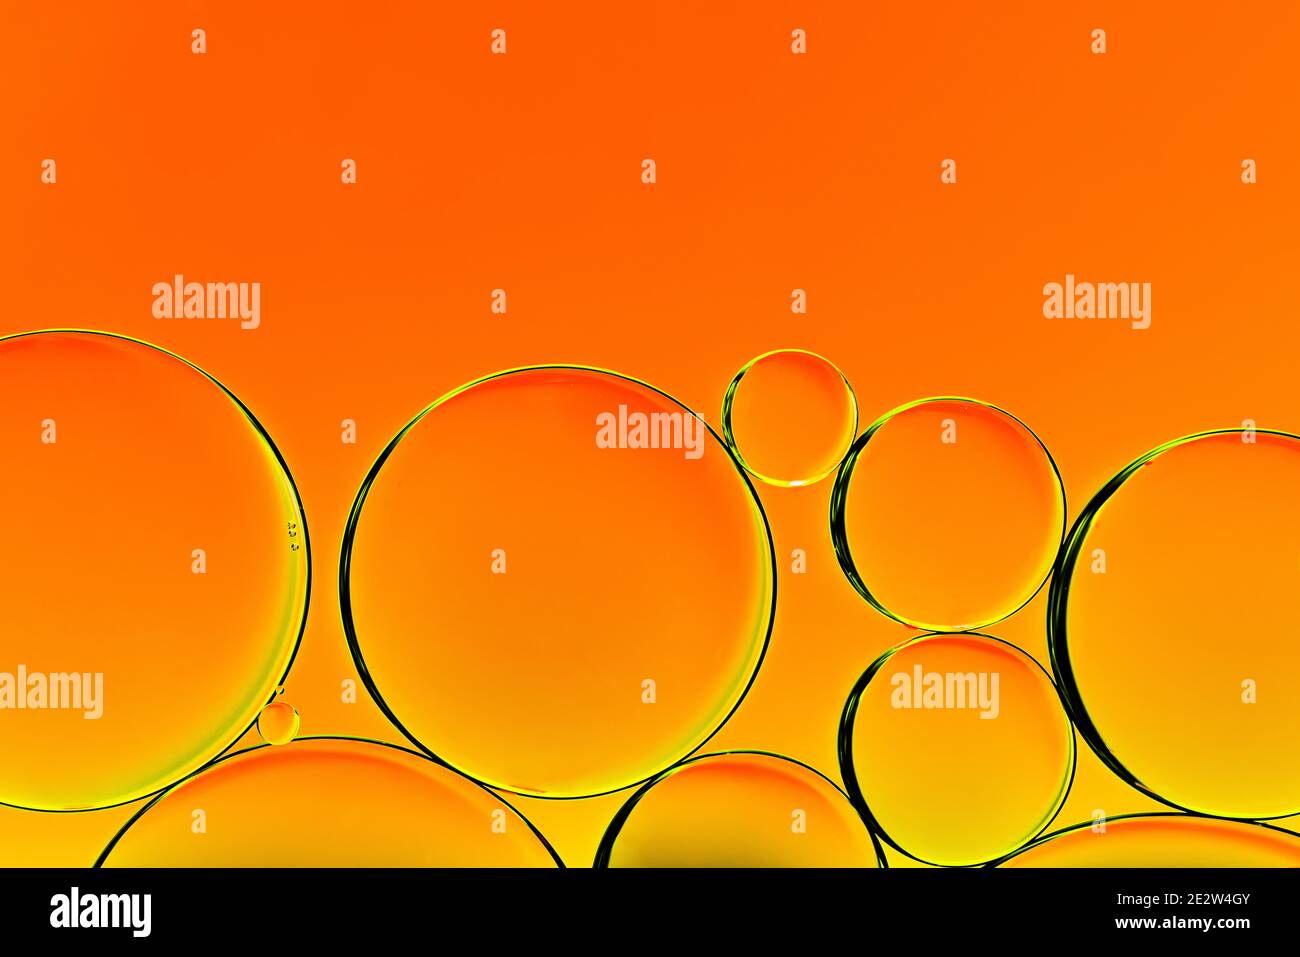 Orange oil drops. Bubbles of different sizes on orange abstract background Stock Photo